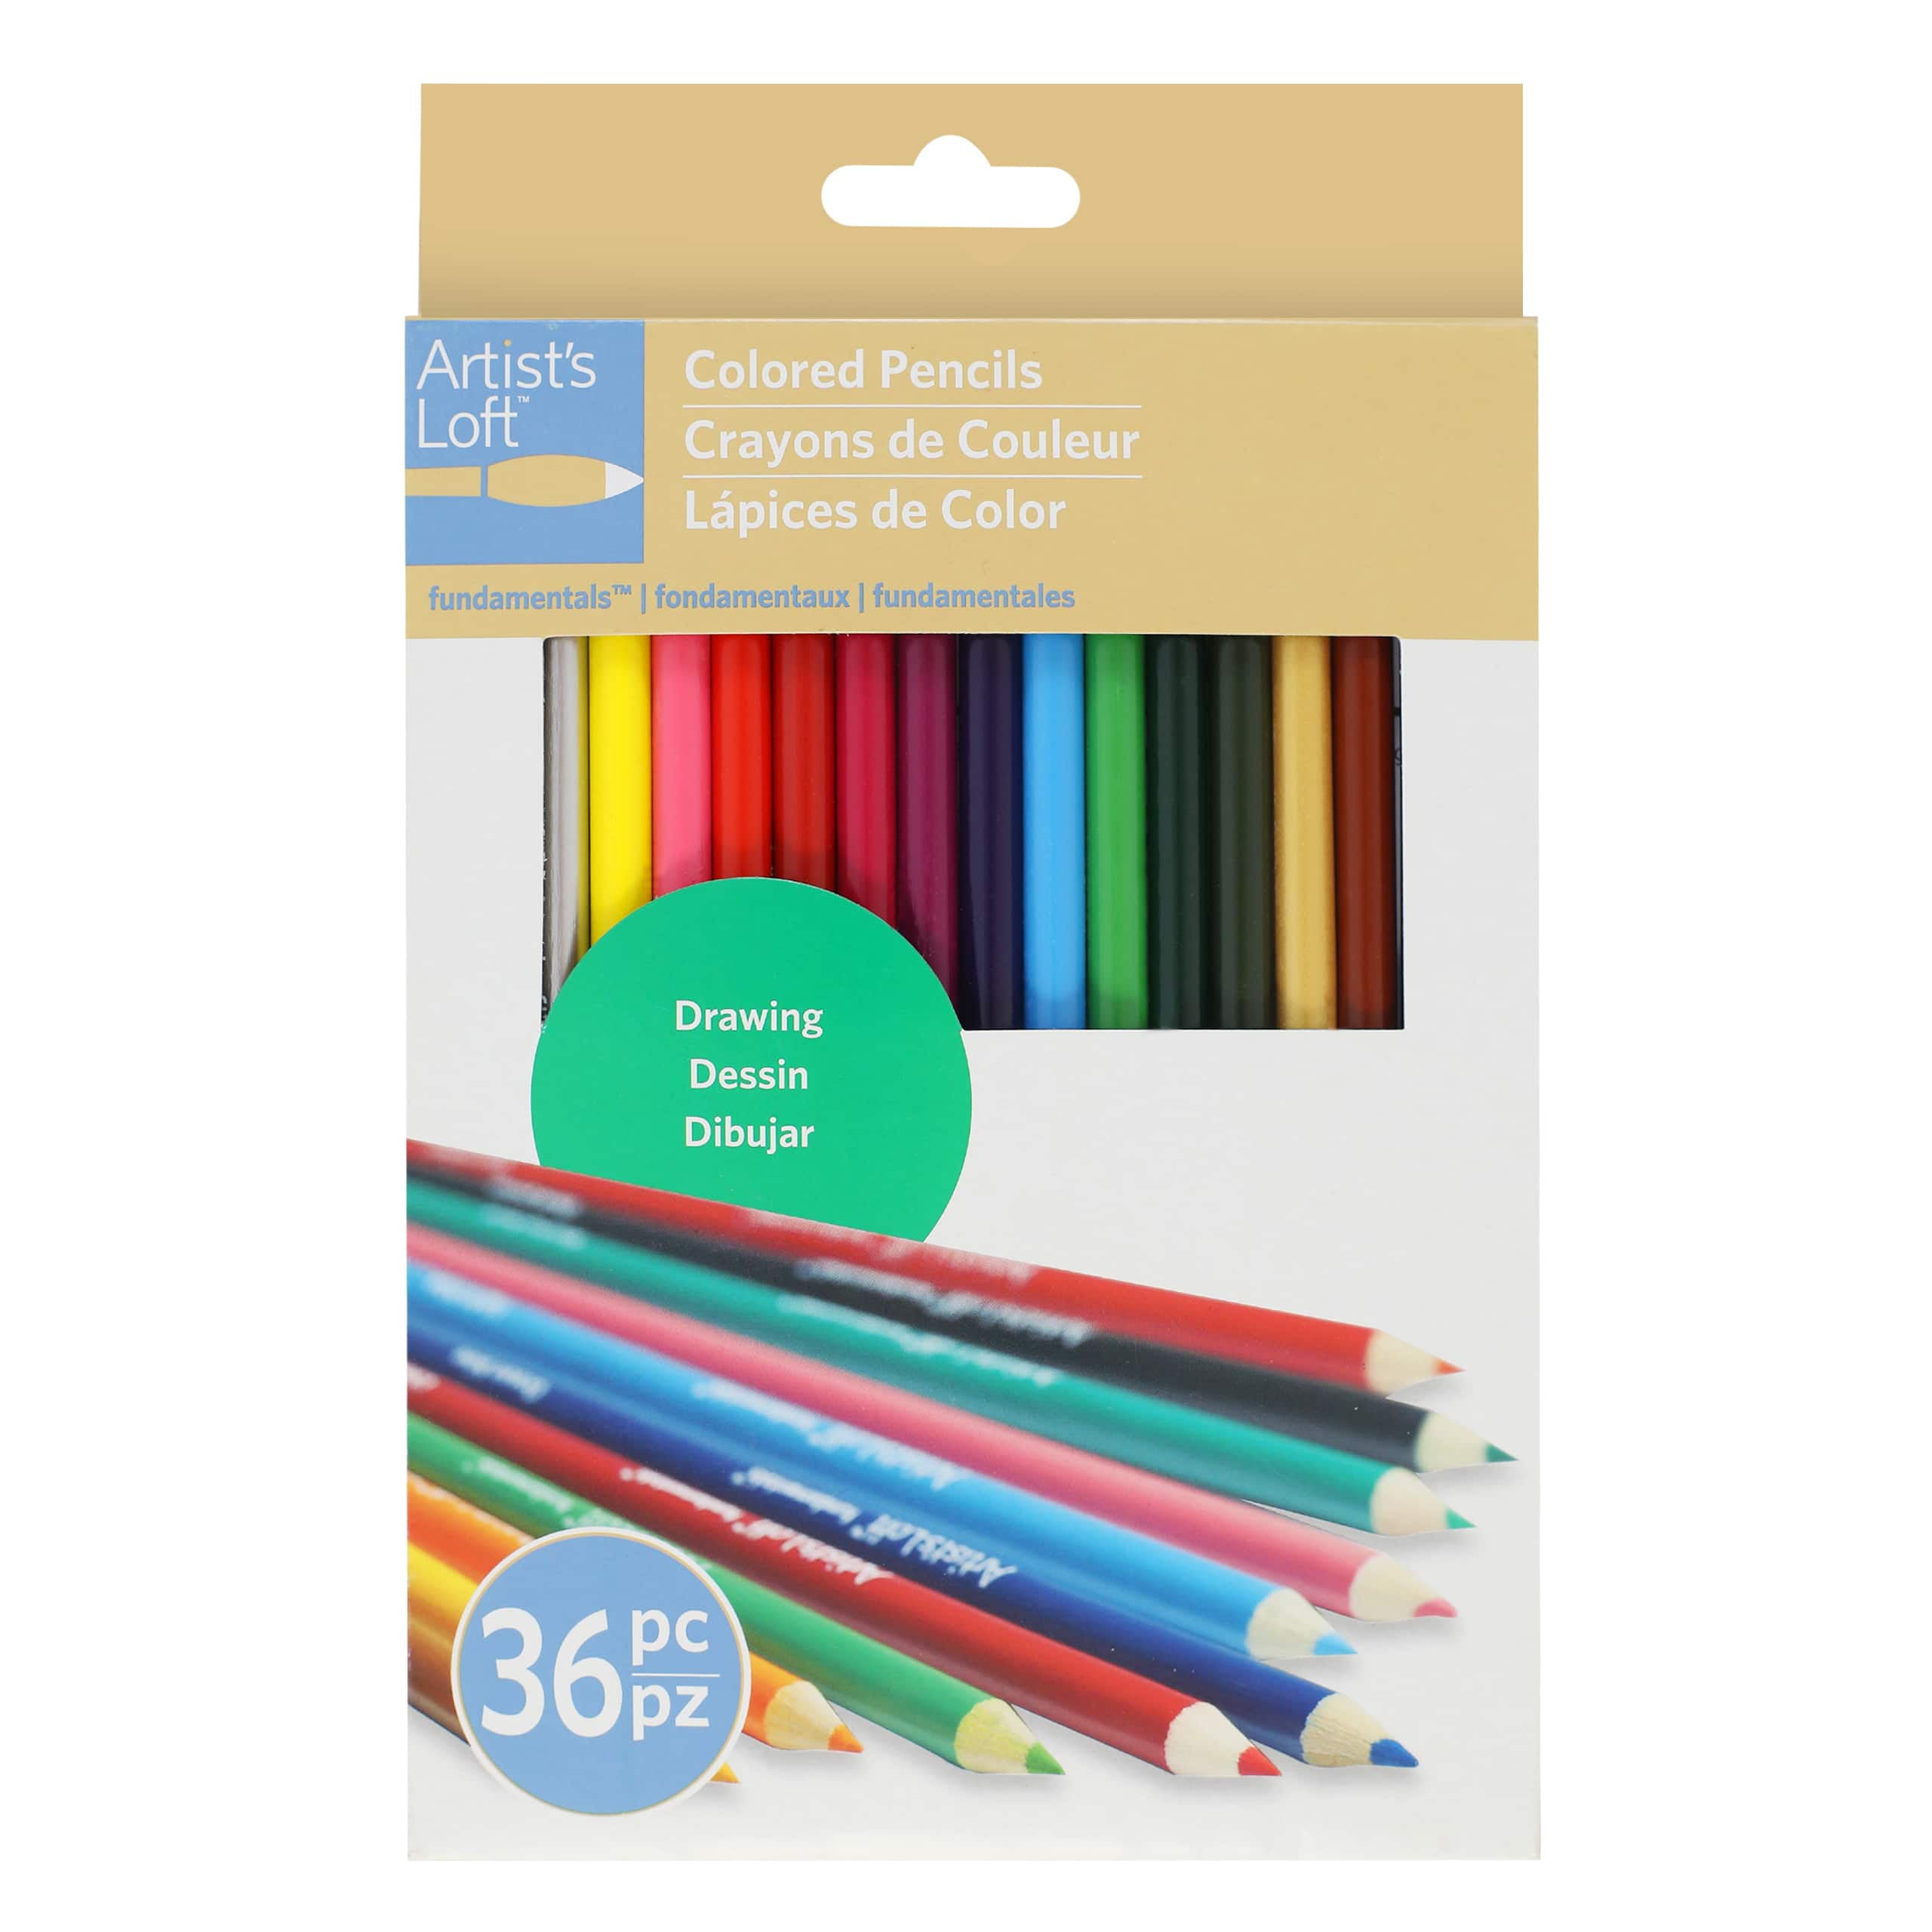 Hokusei Pencil 10805 Colored Pencils, 36 Colors, Girl Pattern, Can :  : Stationery & Office Products